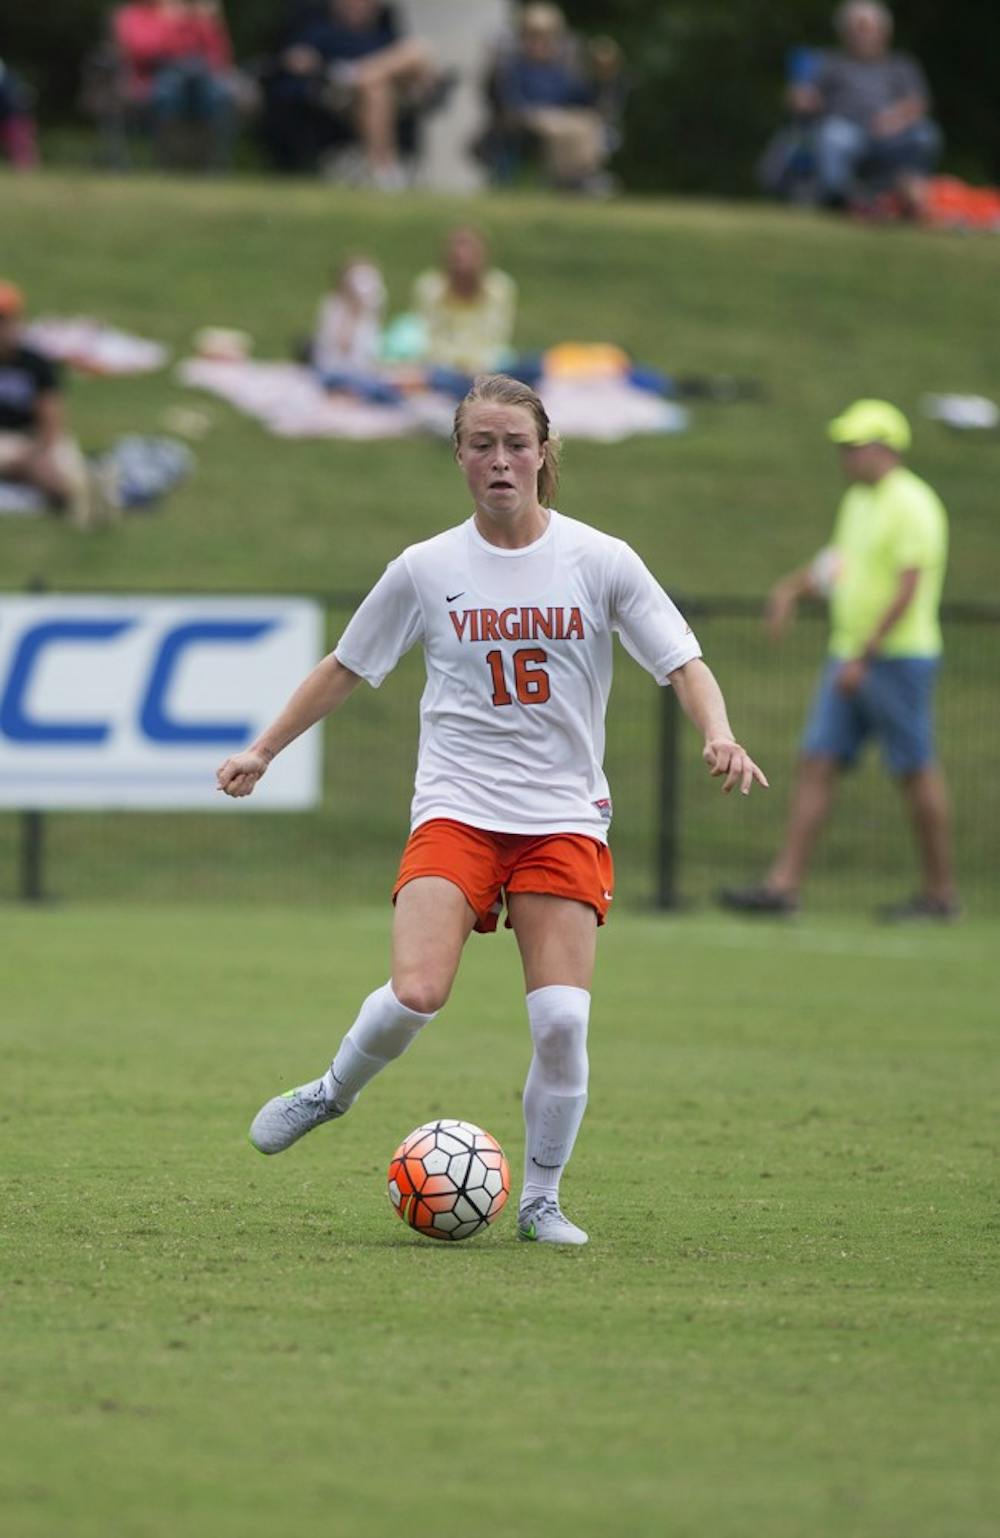 <p>Since rejoining her teammates Oct. 26, Sonnett has guided the Cavaliers to a 3-1 record and a No. 1 seed entering the NCAA Tournament.</p>